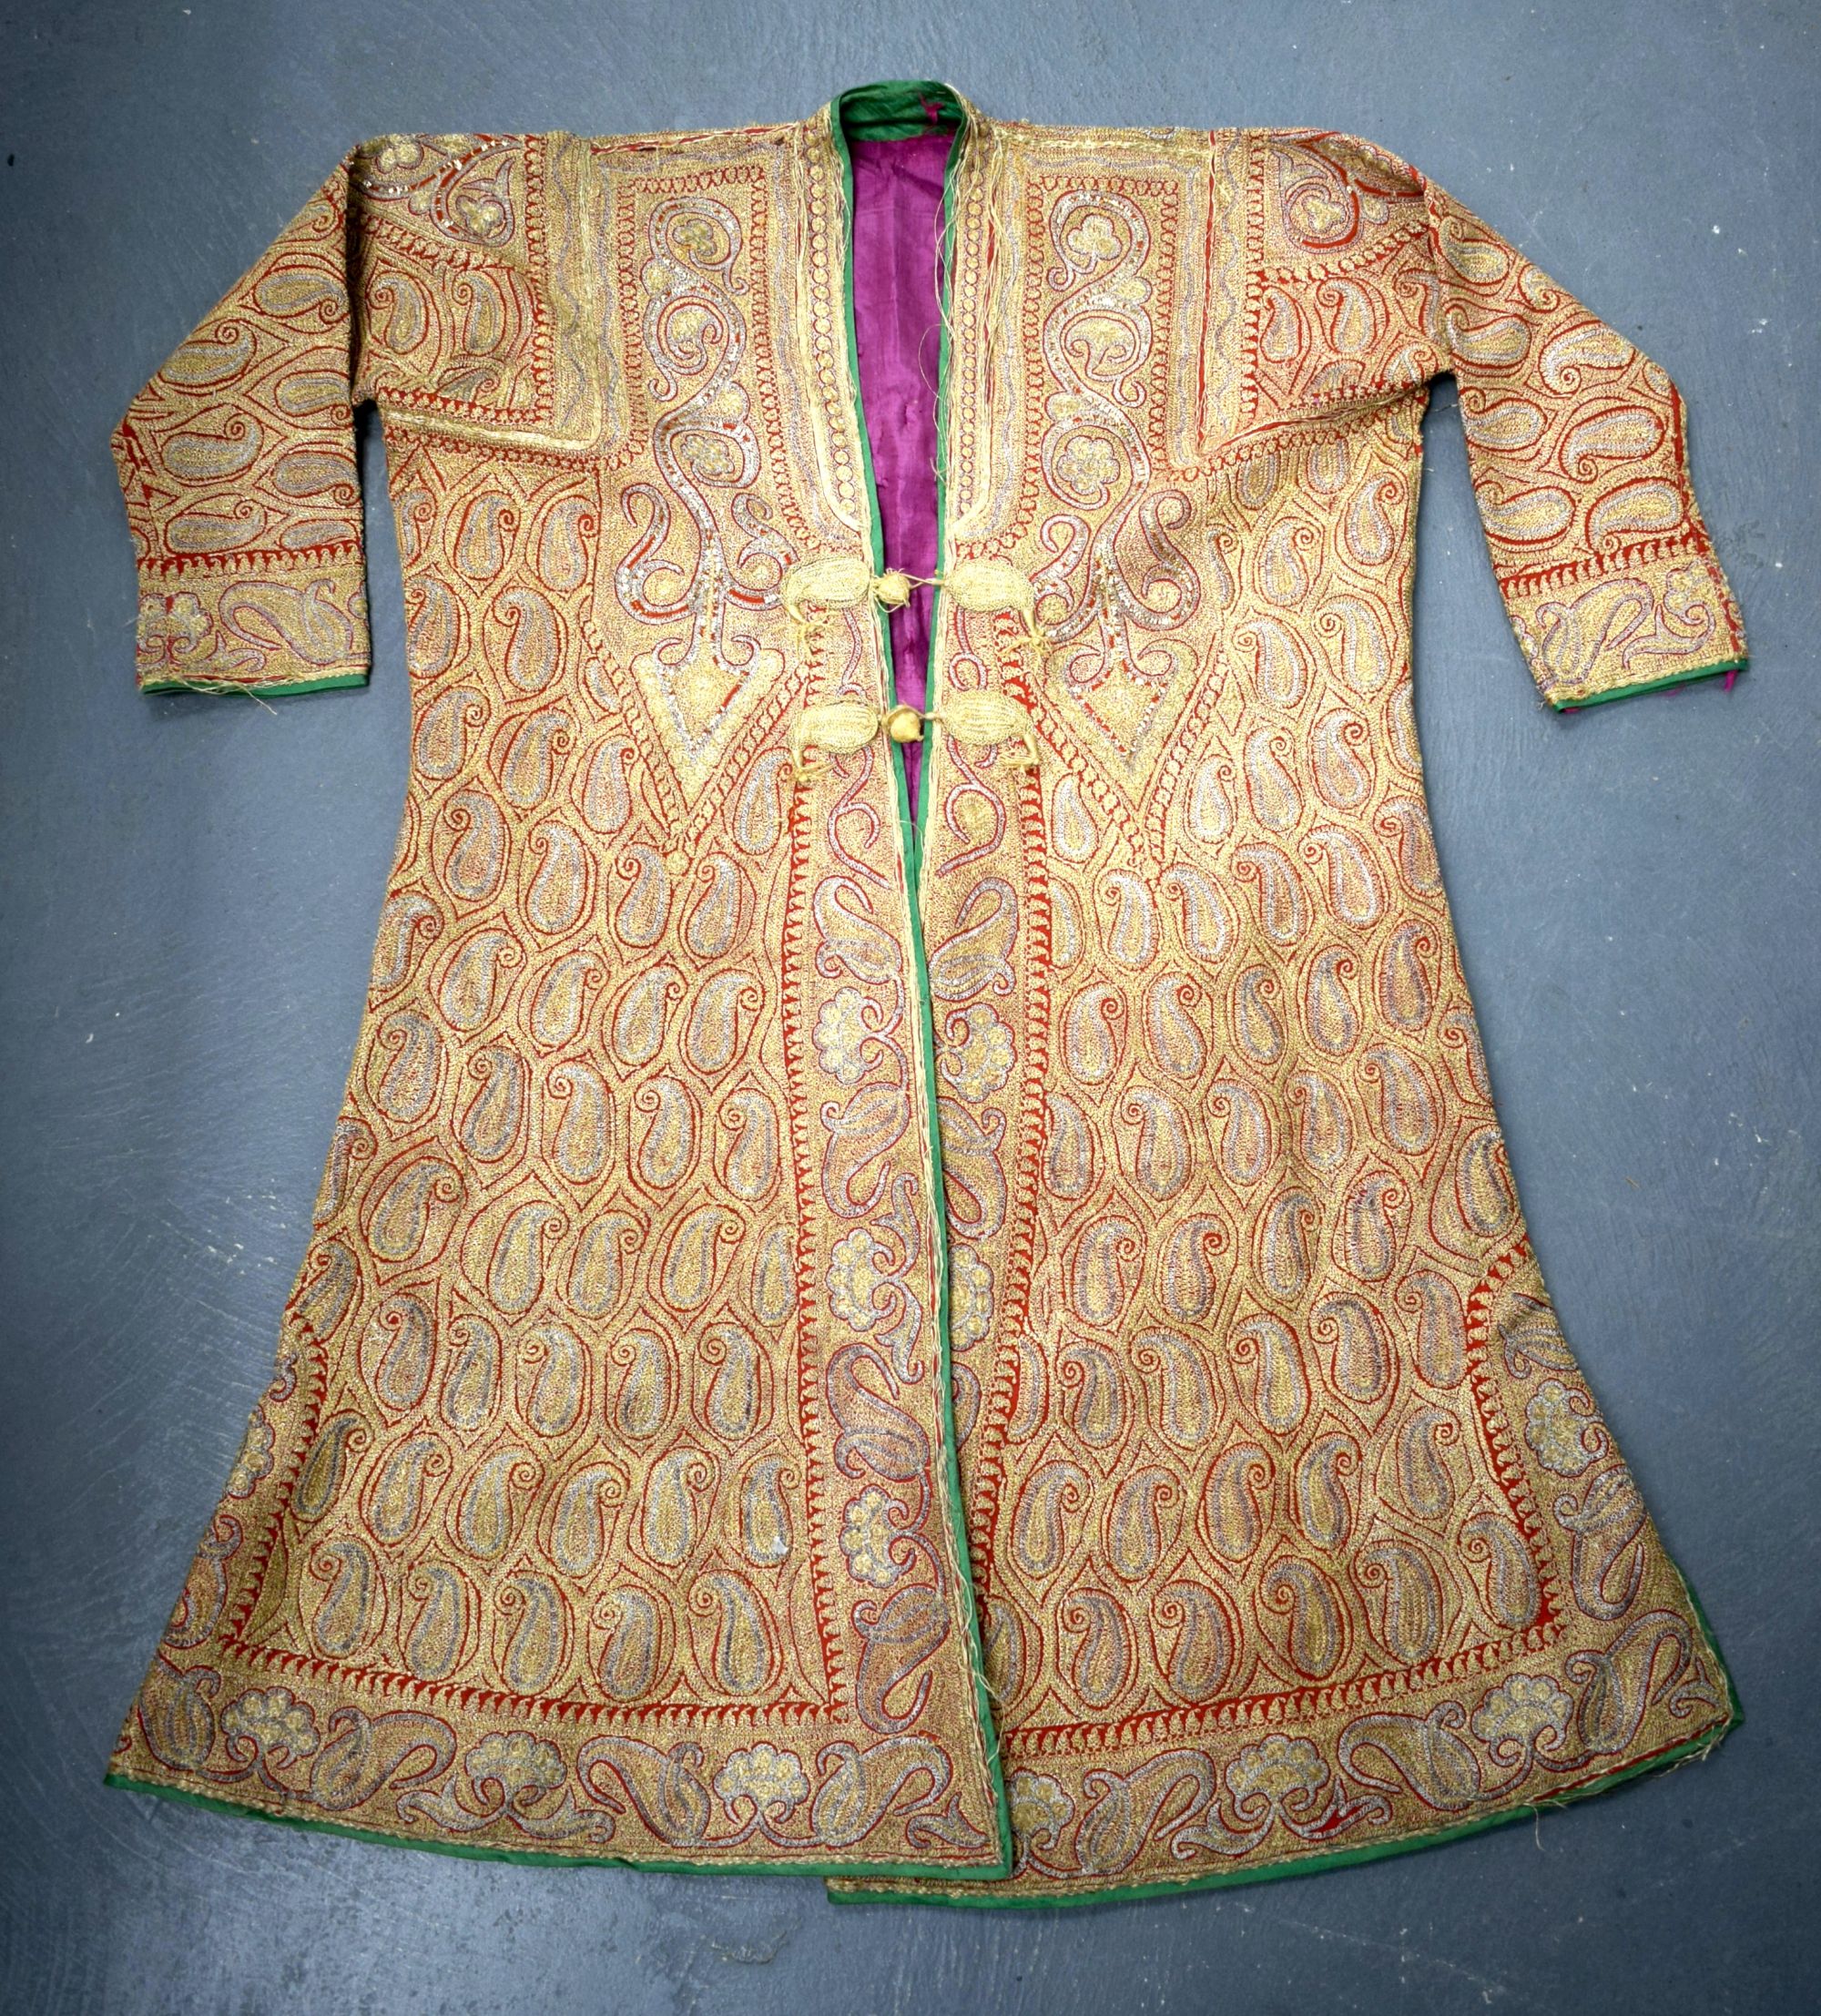 AN EARLY 20TH CENTURY INDIAN EMBROIDERED GOLD SILK JACKET decorated with foliage. 100 cm x 125 cm.